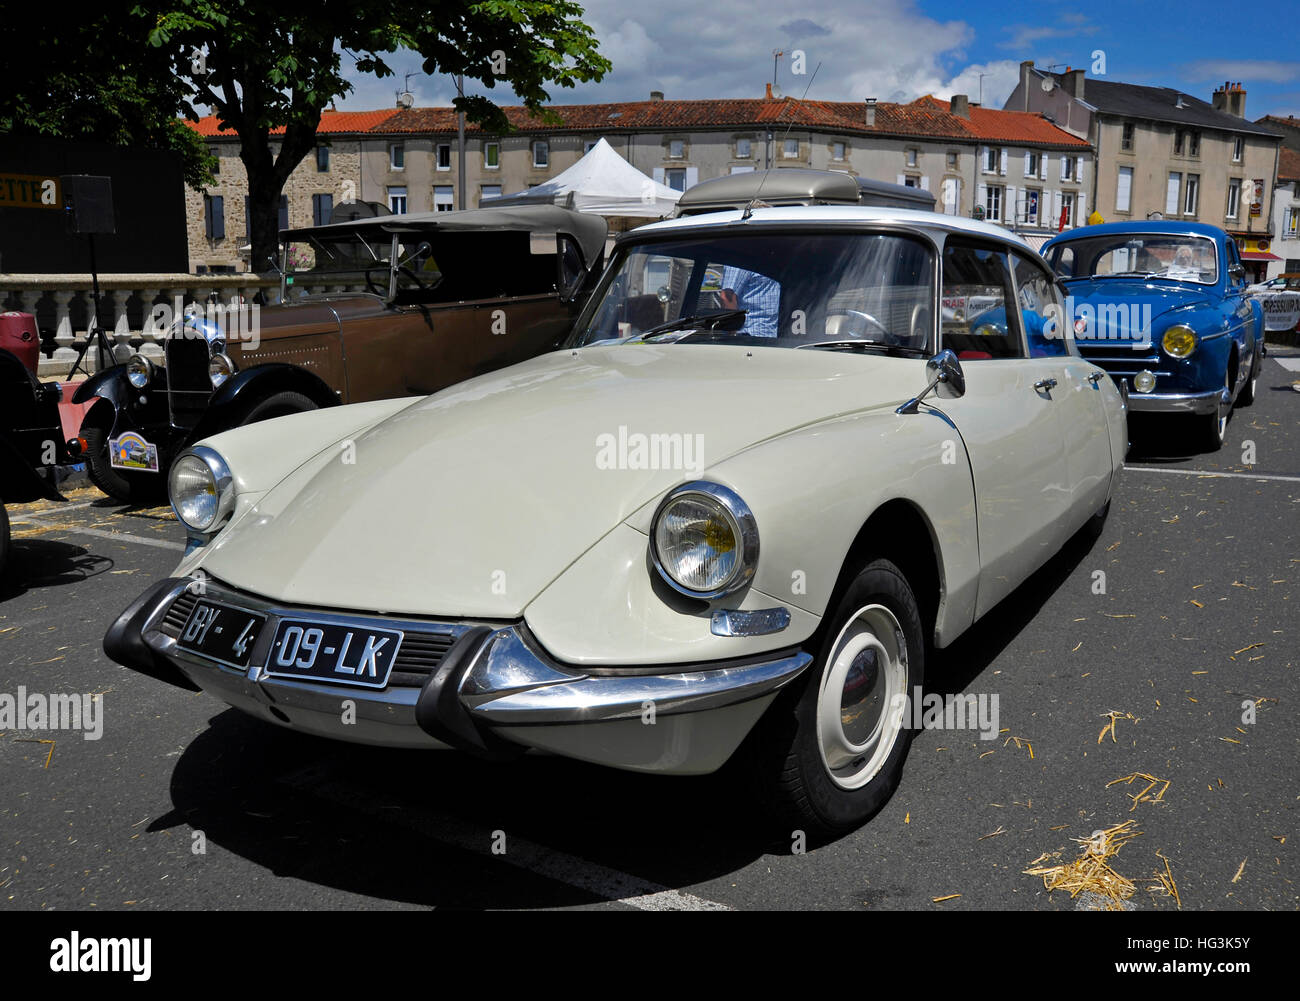 Citroen DS19 classic French car Stock Photo